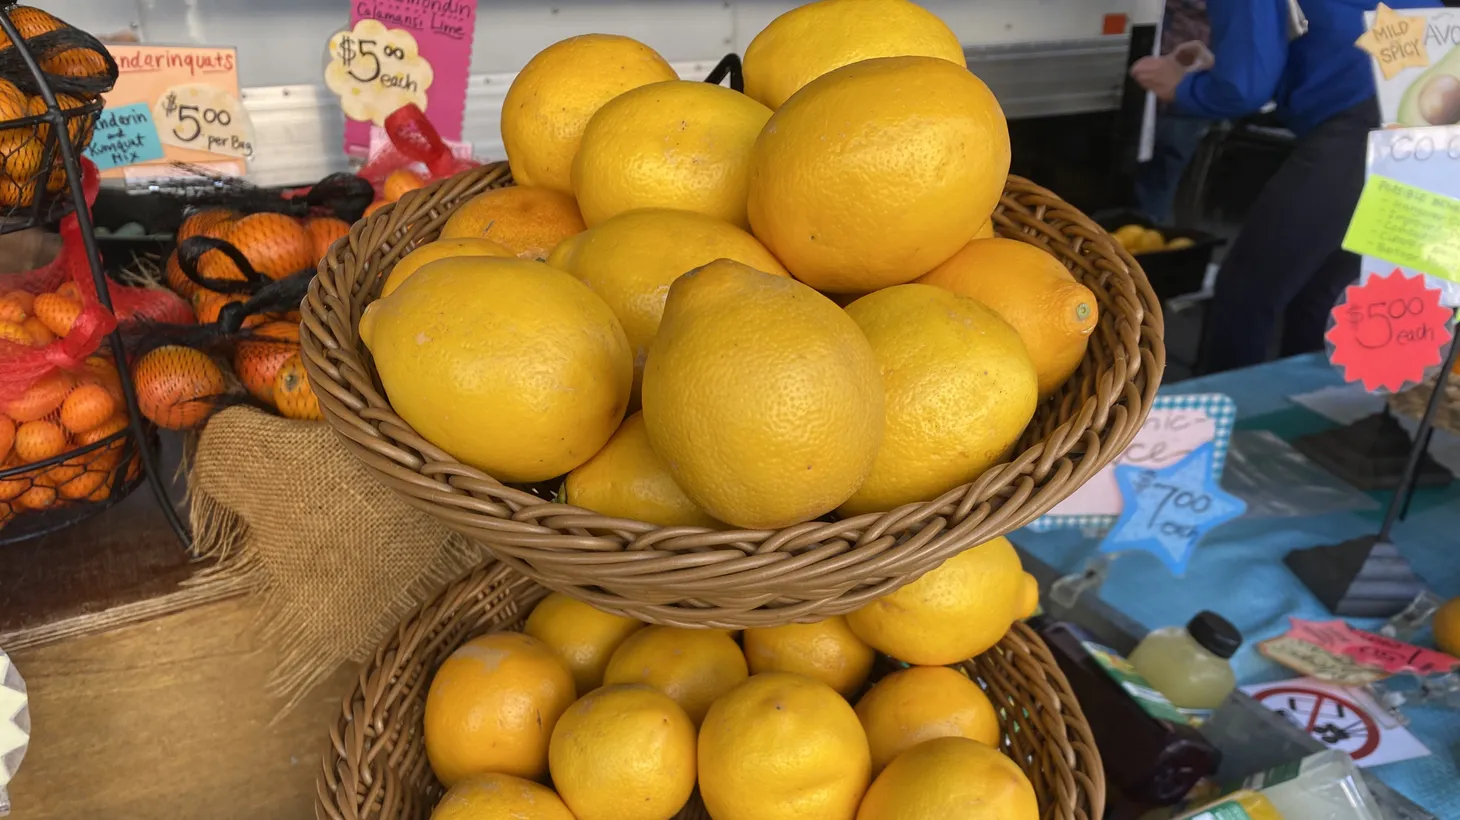 Laura Ramirez of J.J. Lone's Daughter Ranch recommends freezing the juice of Meyer lemons in ice cube trays to extend their use beyond the season.